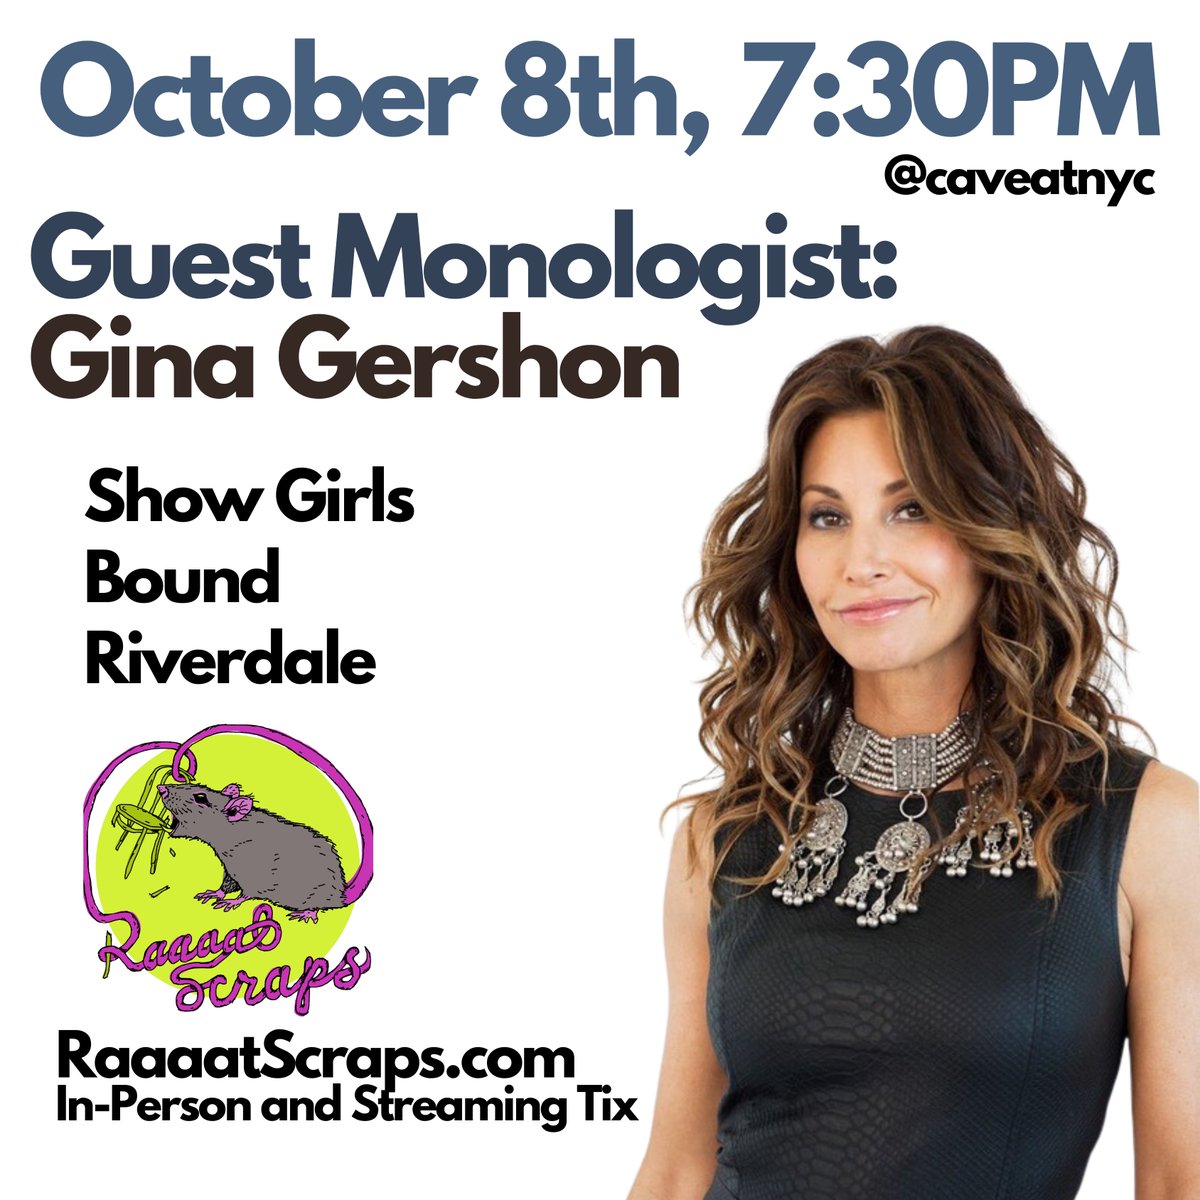 October 8th, our guest monologist is Gina Gershon! Gina stopped by a few times in the old days over at Asssscat, this is her debut with the Raaaats! There are always great stories, and always a great time. Get your tix! In-Person or streaming. RaaaatScraps.com/shows